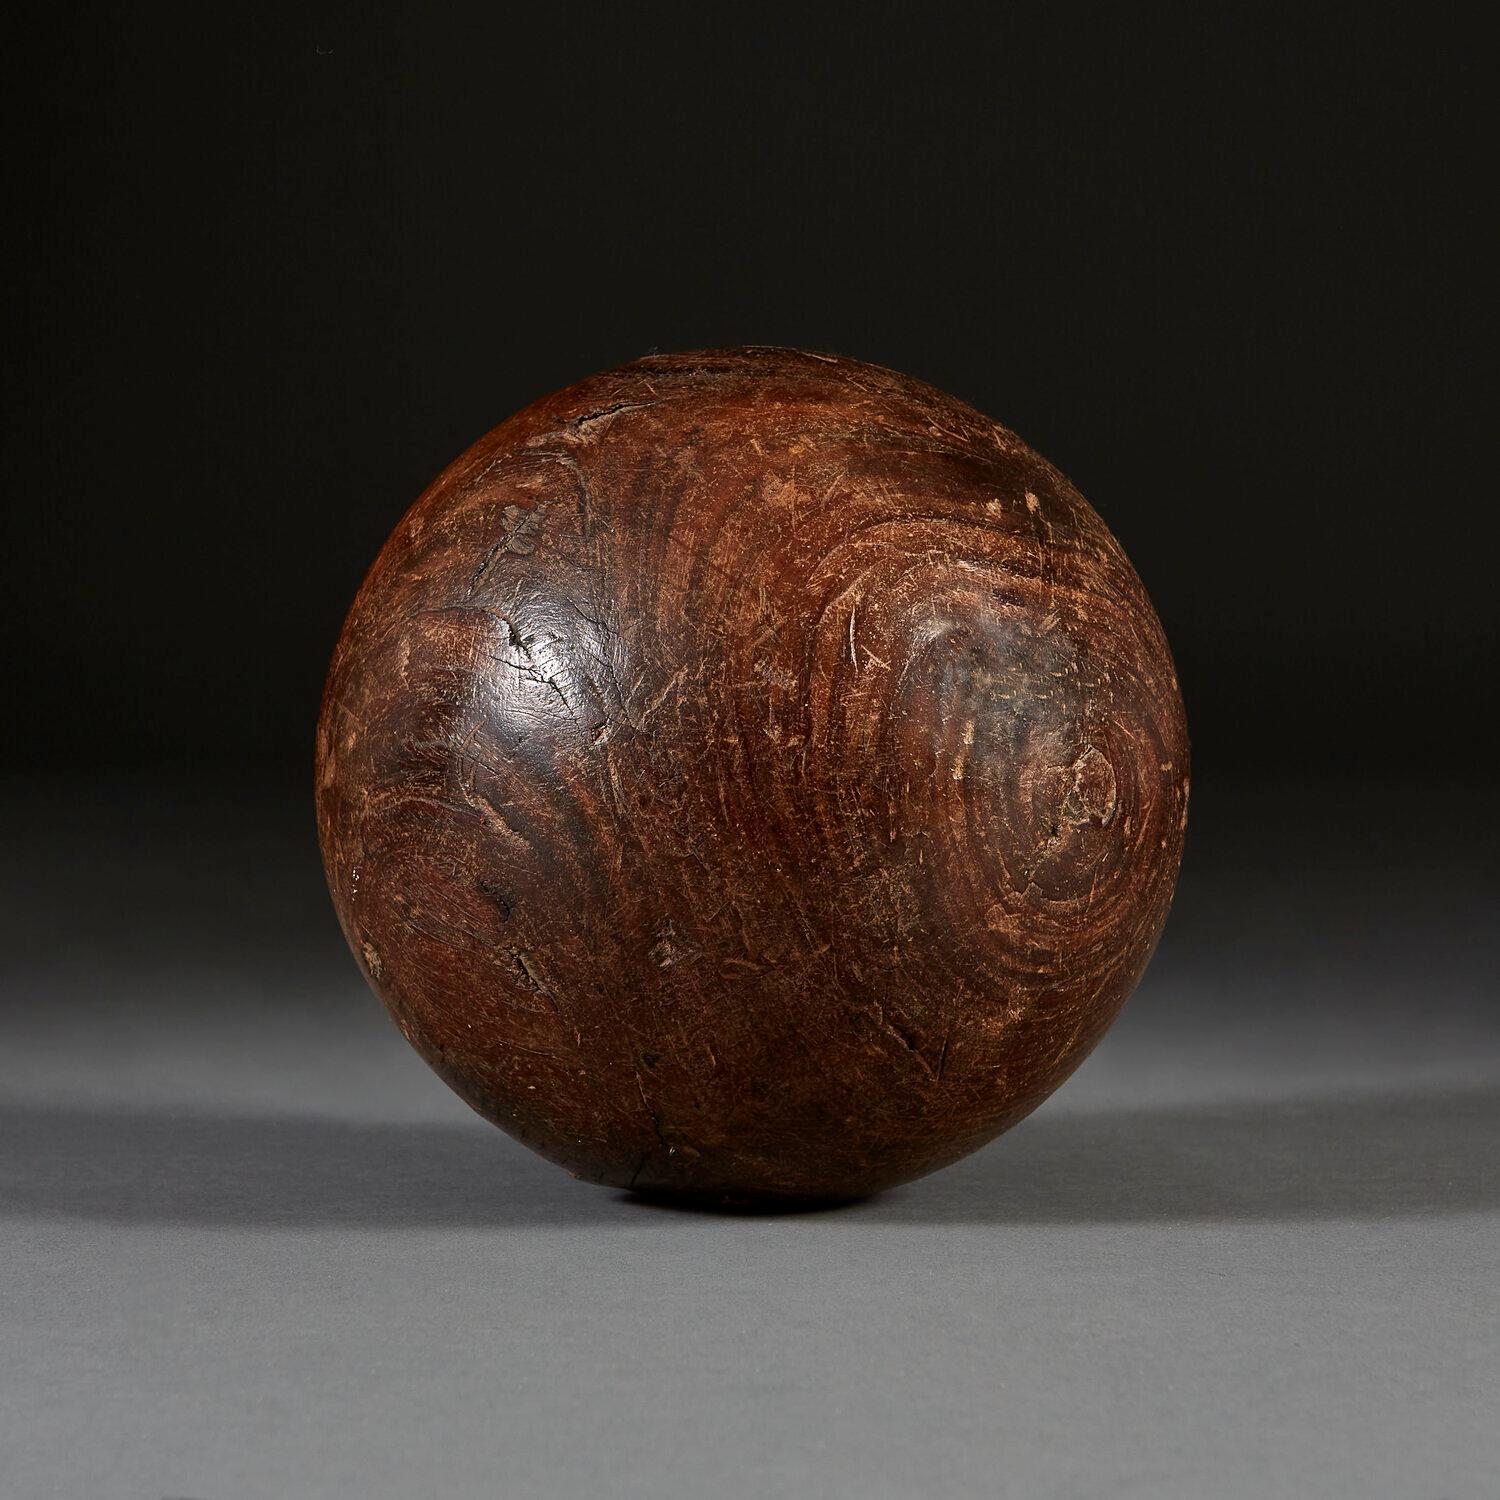 A late eighteenth century lignum vitae sphere of large scale.

Lignum vitae was favoured by Dame Barbara Hepworth, and a Hepworth sphere sculpture in the material was recently sold for £650,000.